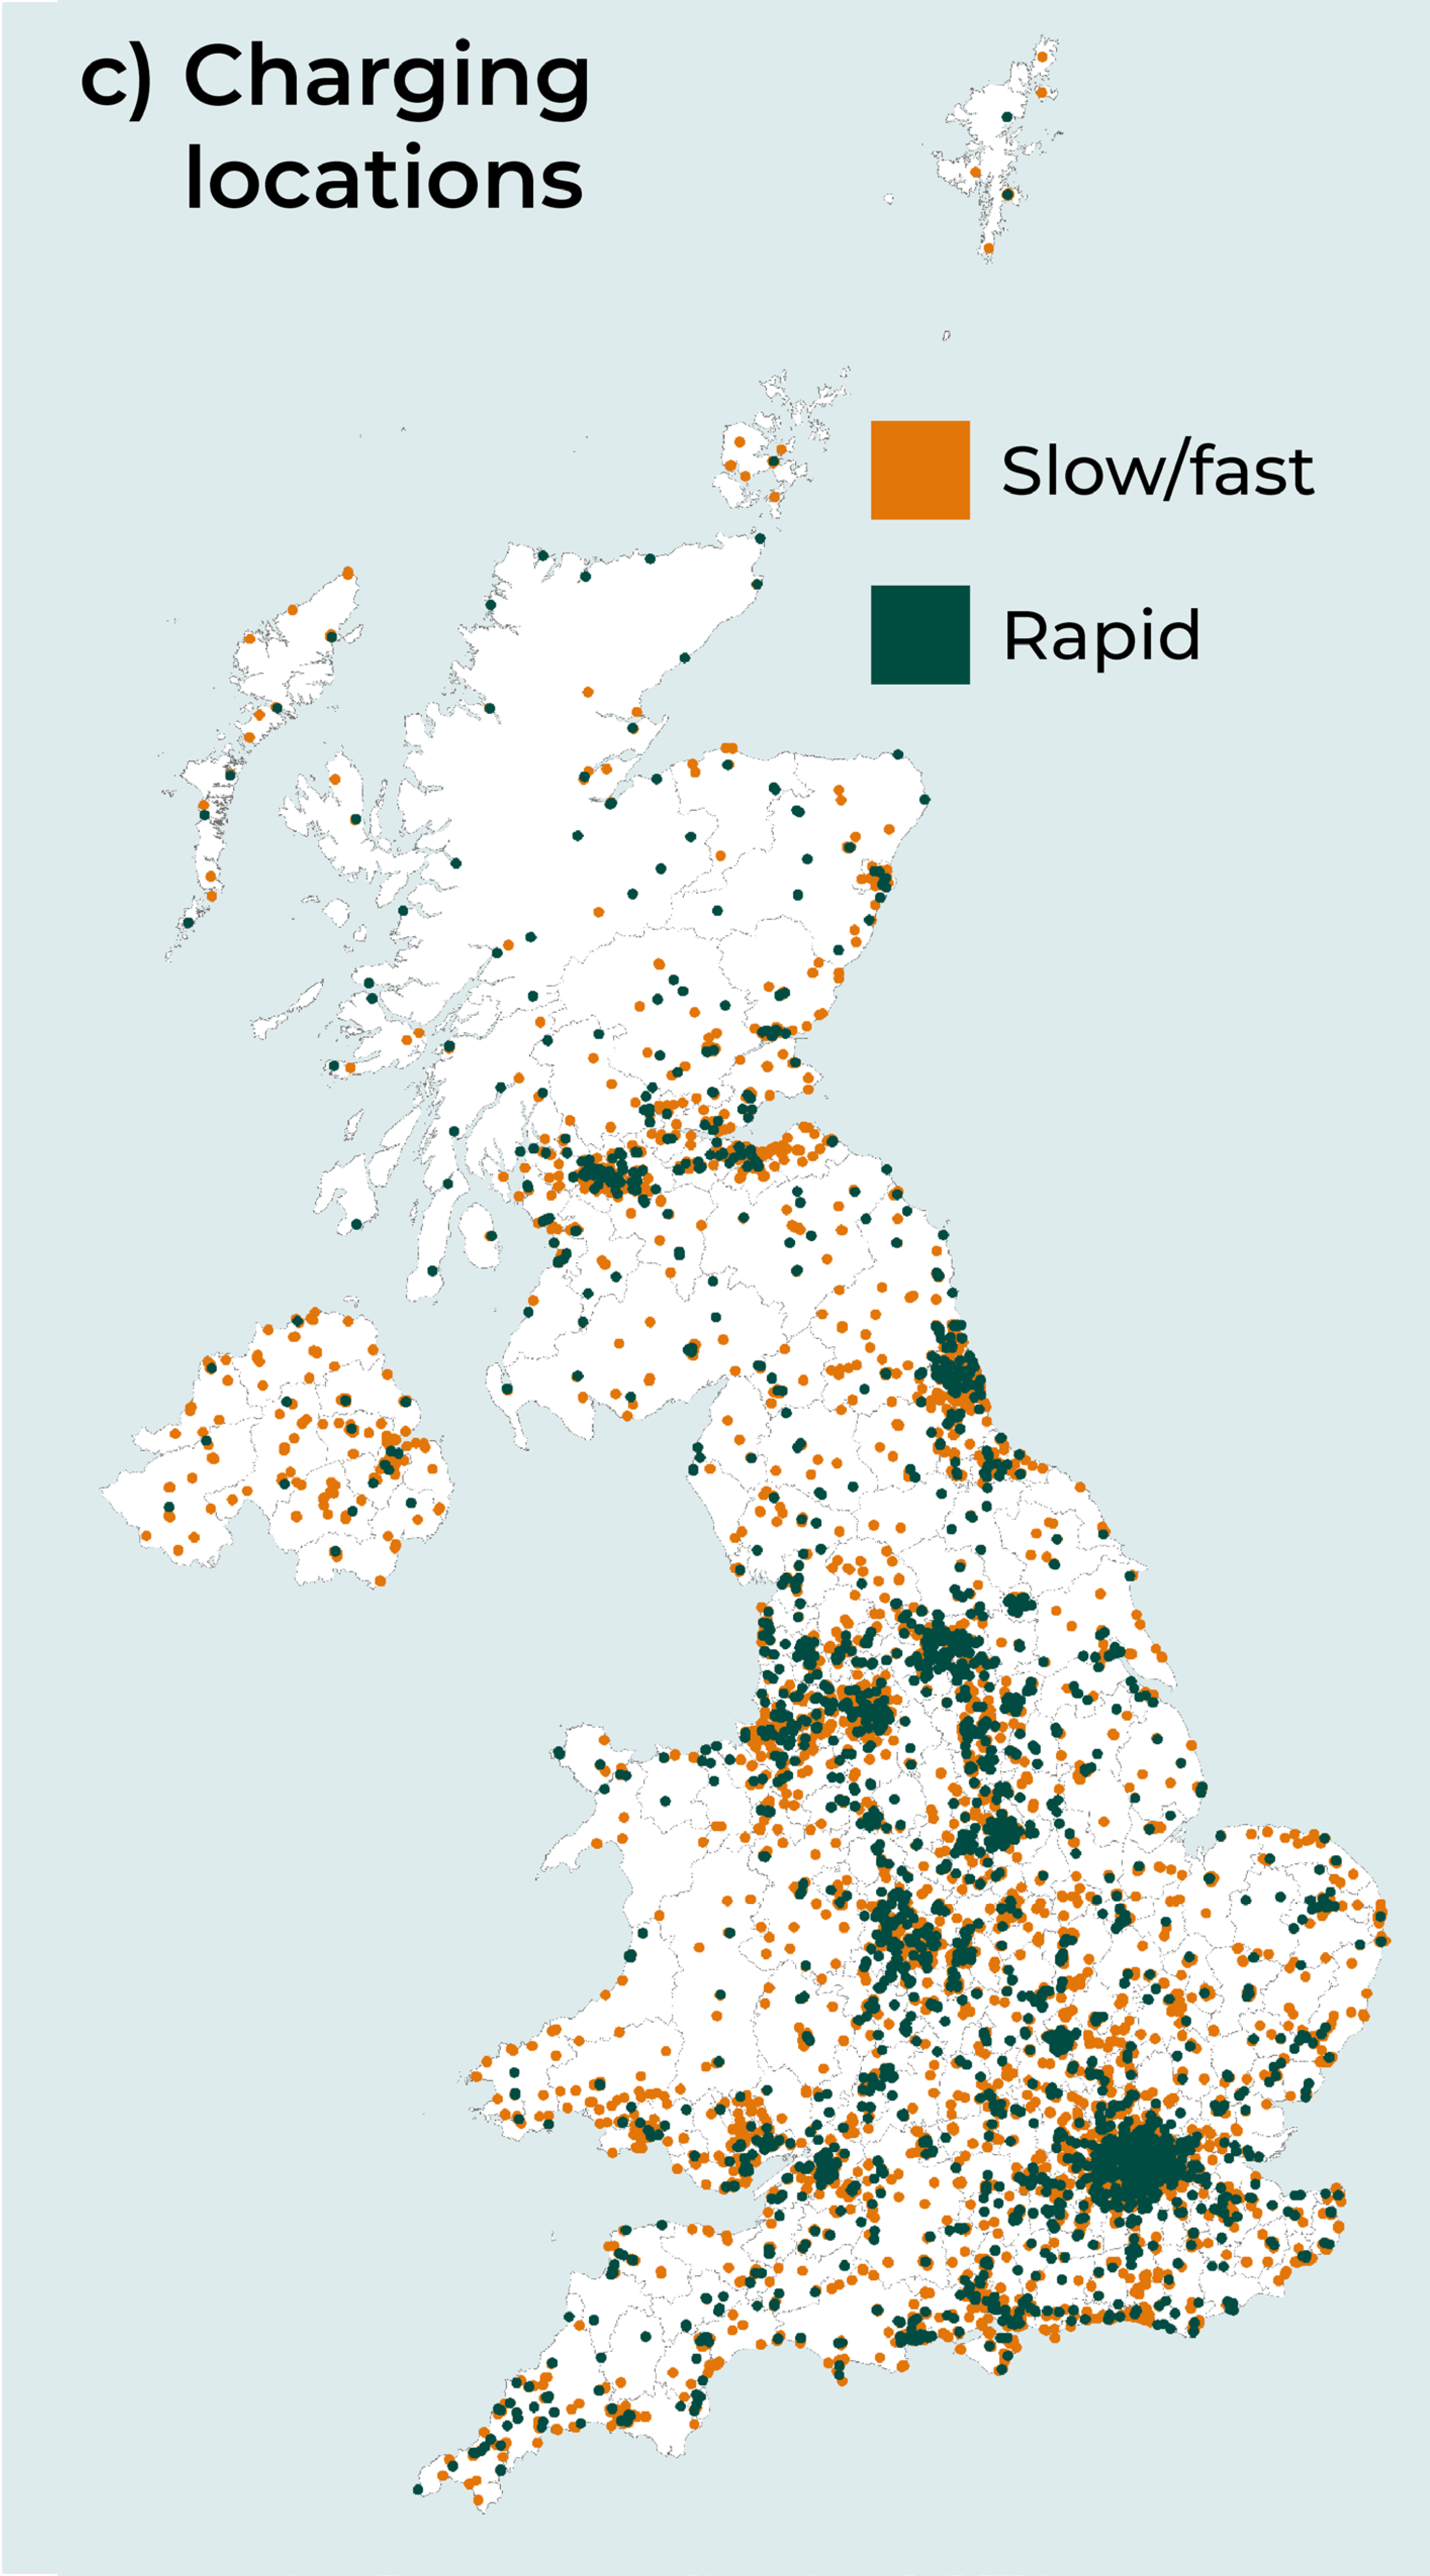 A map with locations of charging points across the UK plotted on it. Rapid chargers are shown in green and slower chargers in yellow. There are more electric chargers in south Wales.